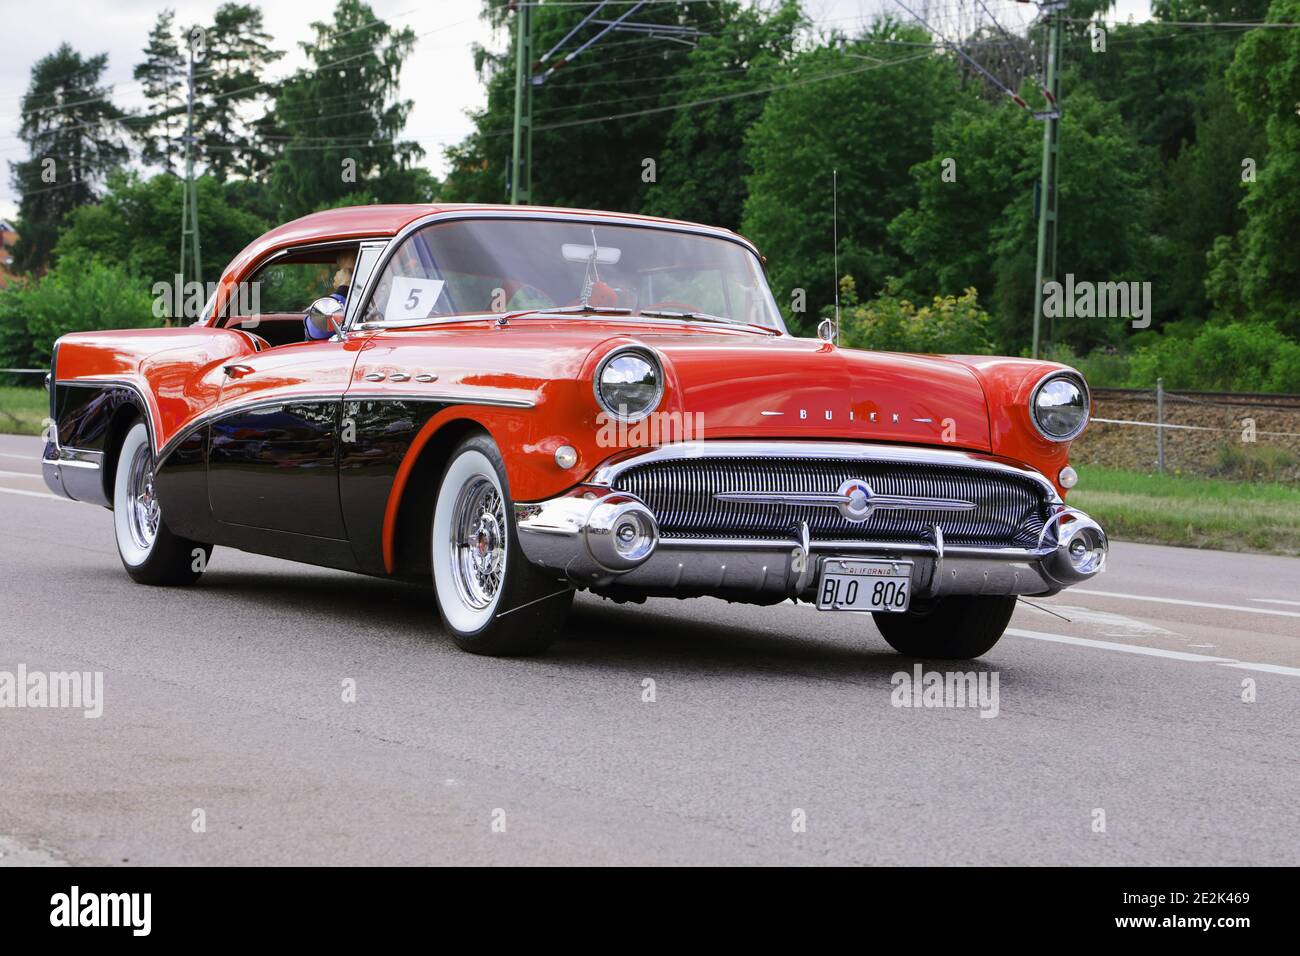 Vasteras, Sweden - July 5, 2013: One red 1957 Buick Riviera during the Big meet event. Stock Photo